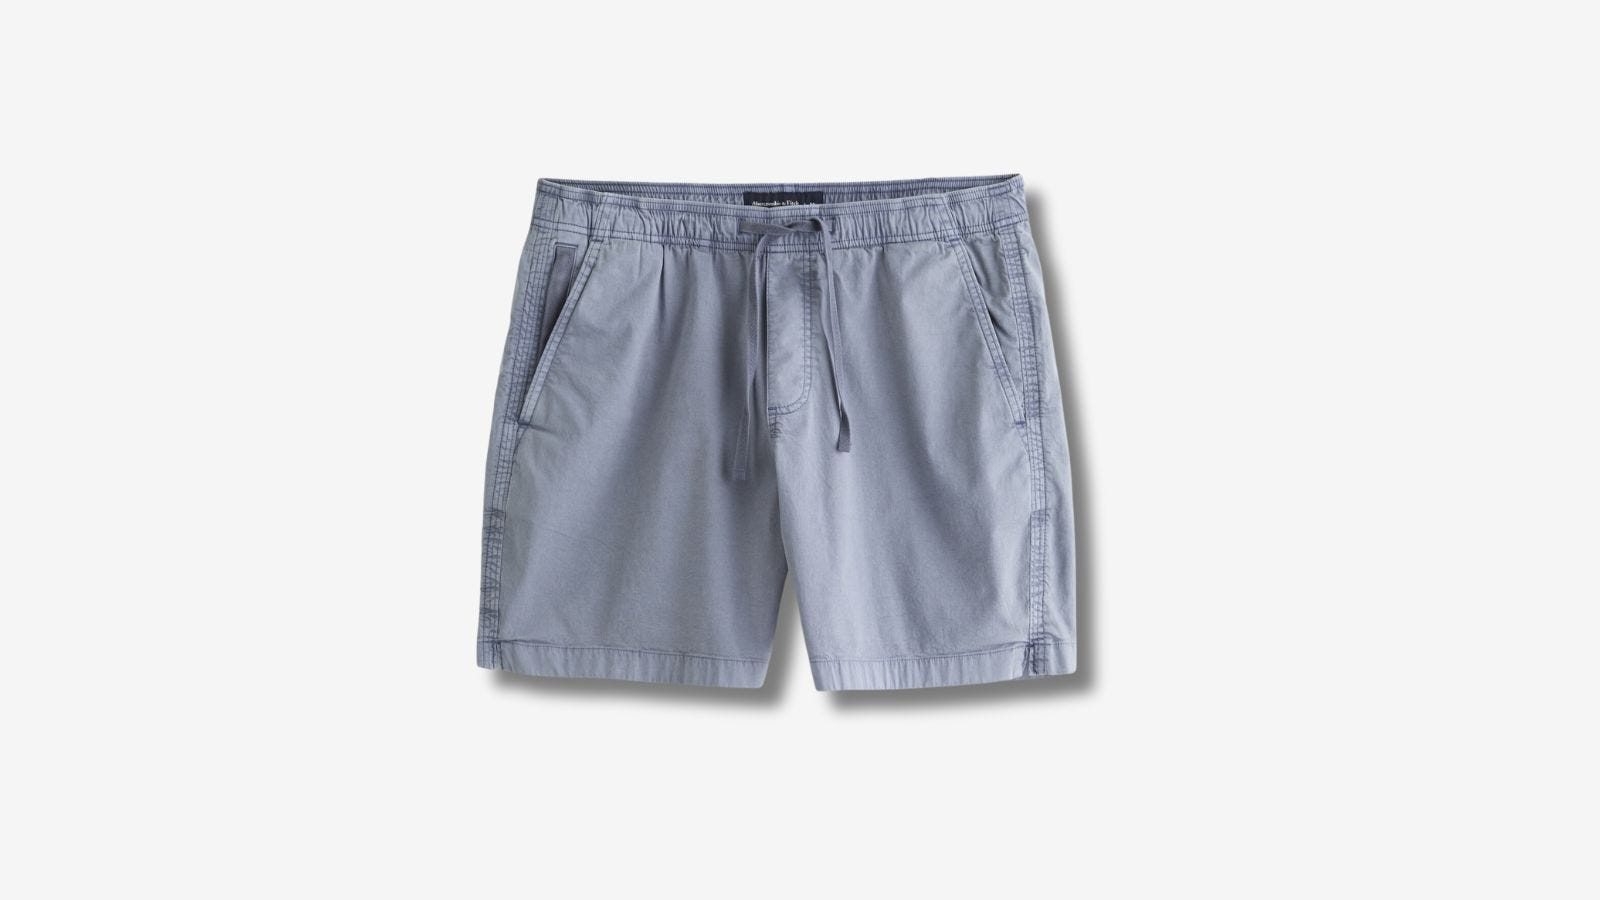 pair of blue drawstring shorts against a blank background